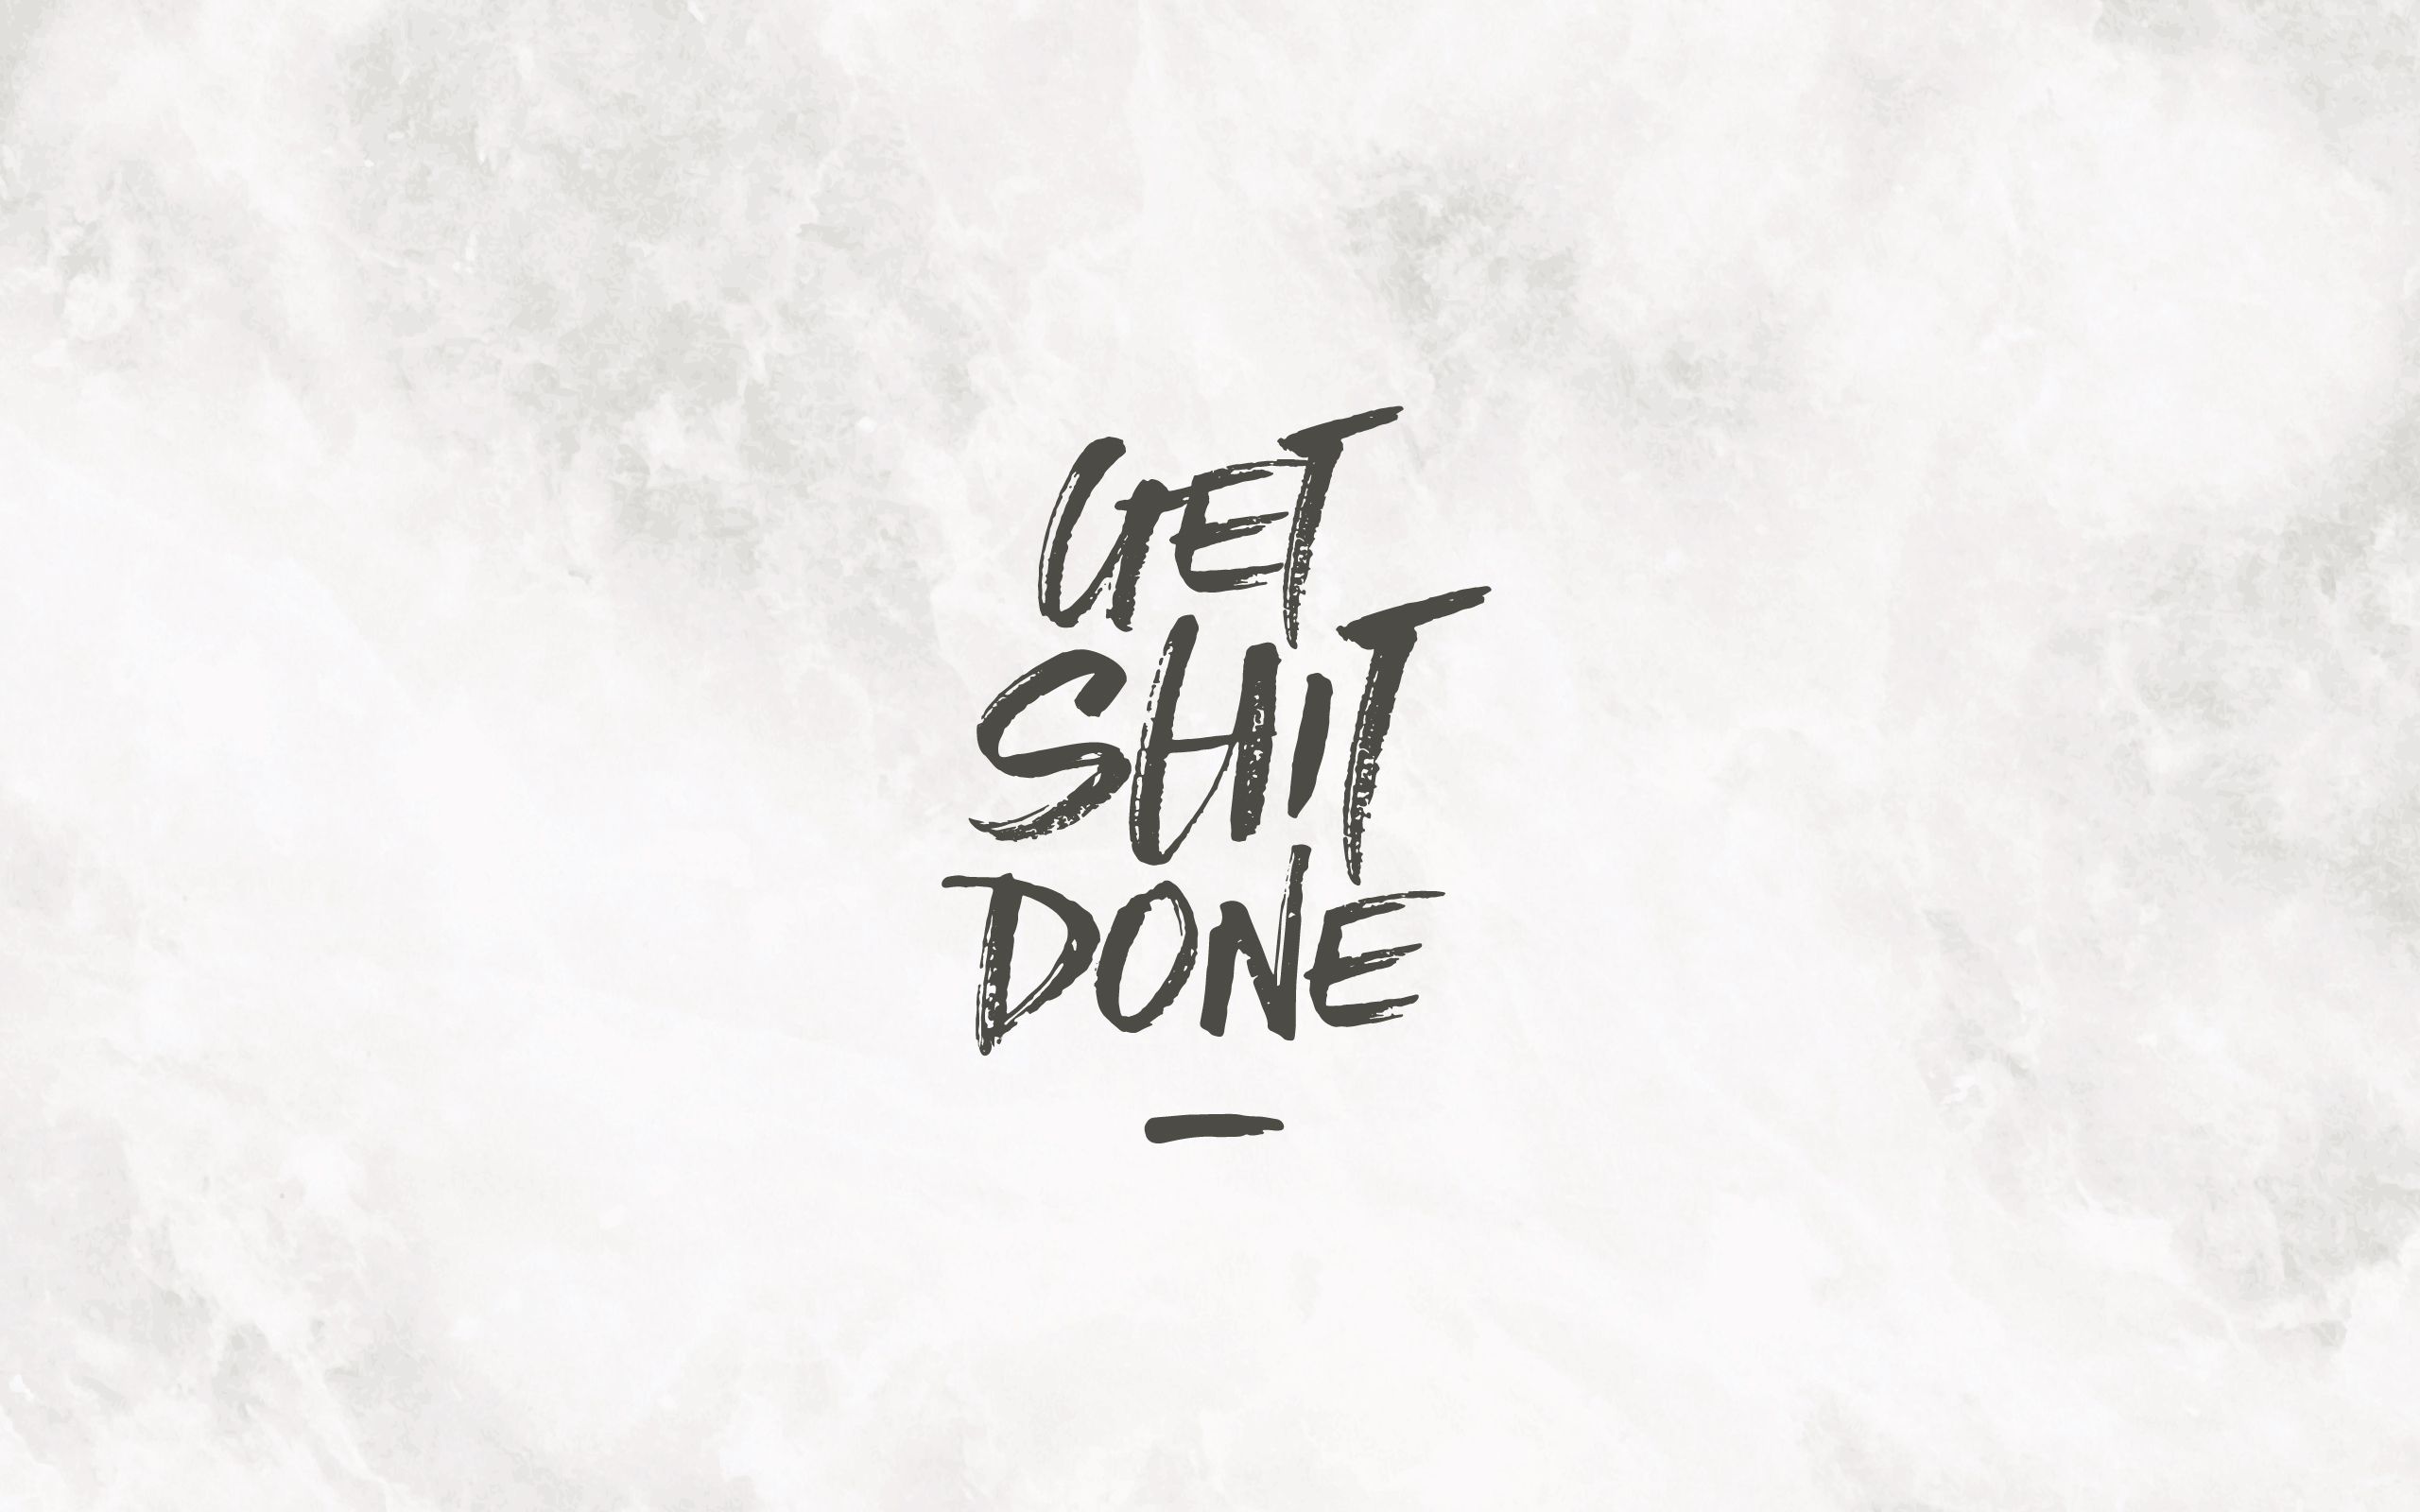 Get Things Done Wallpapers